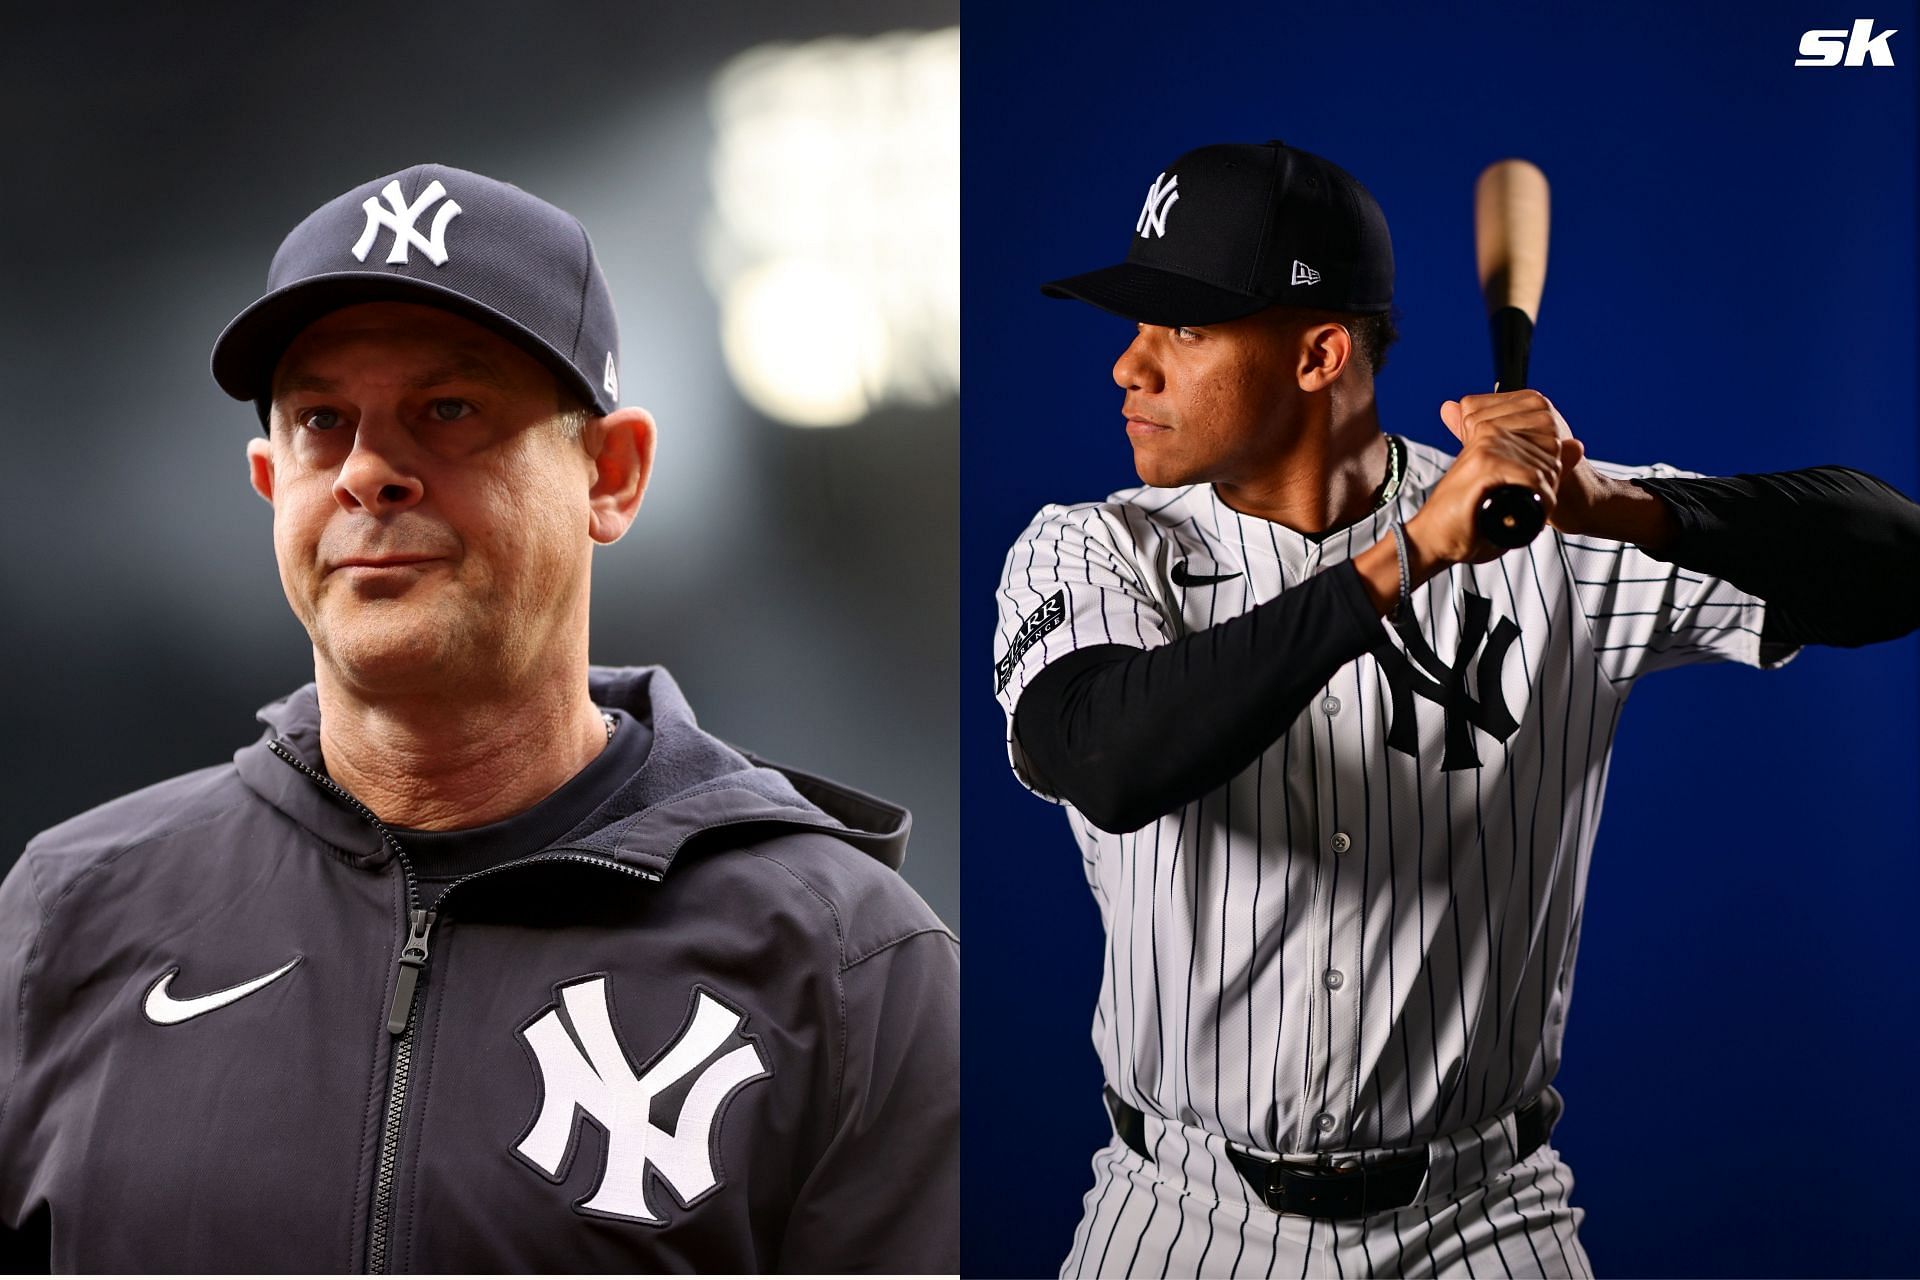 Aaron Boone mesmerized by Soto